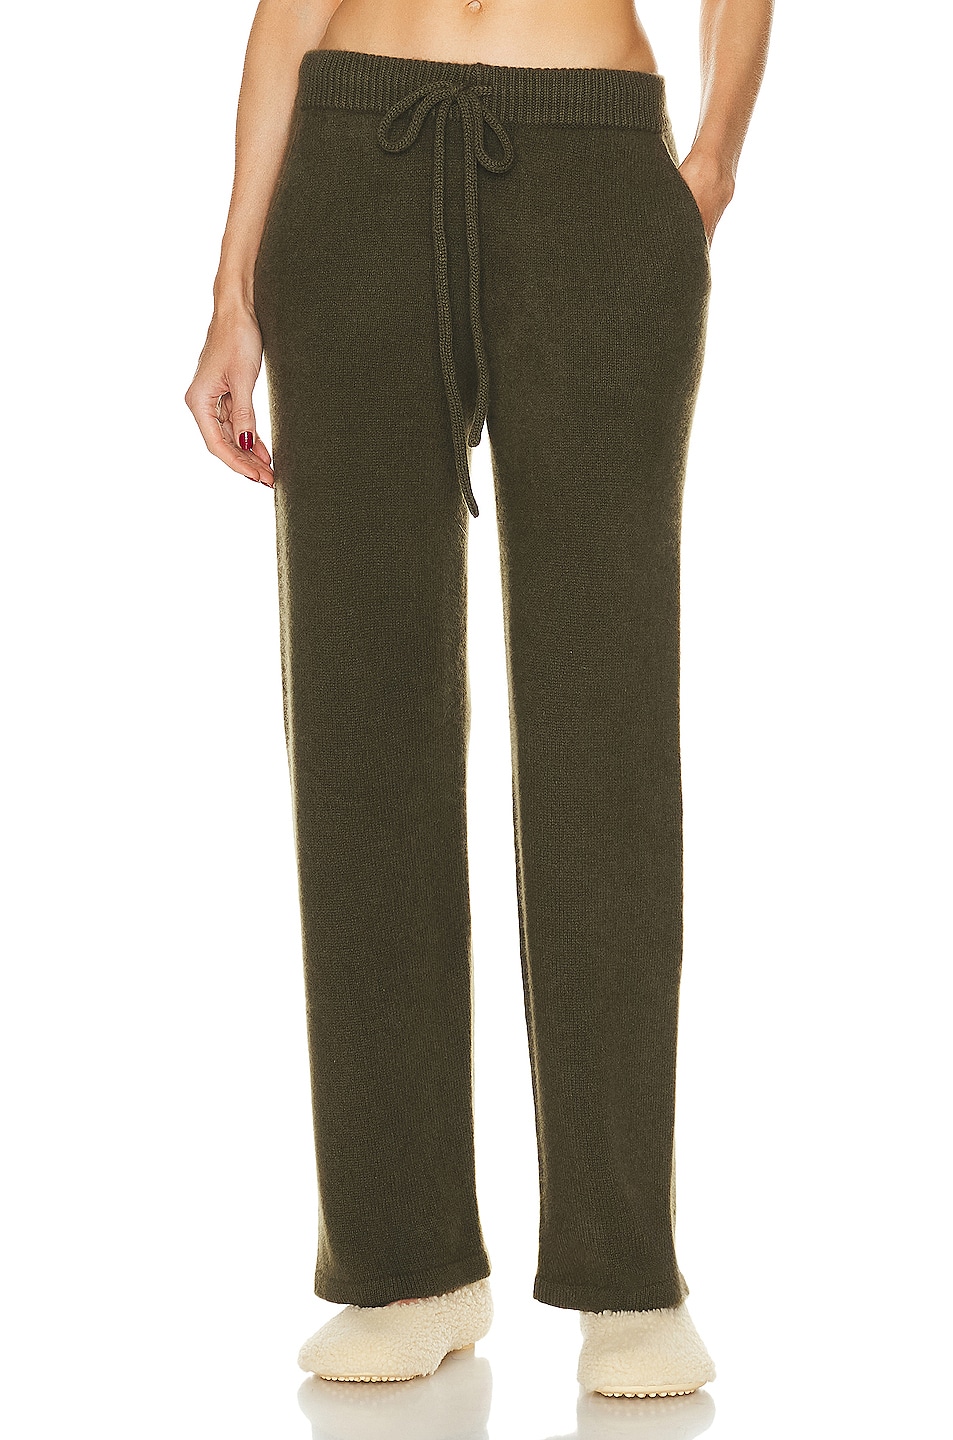 Lounge Pant in Olive